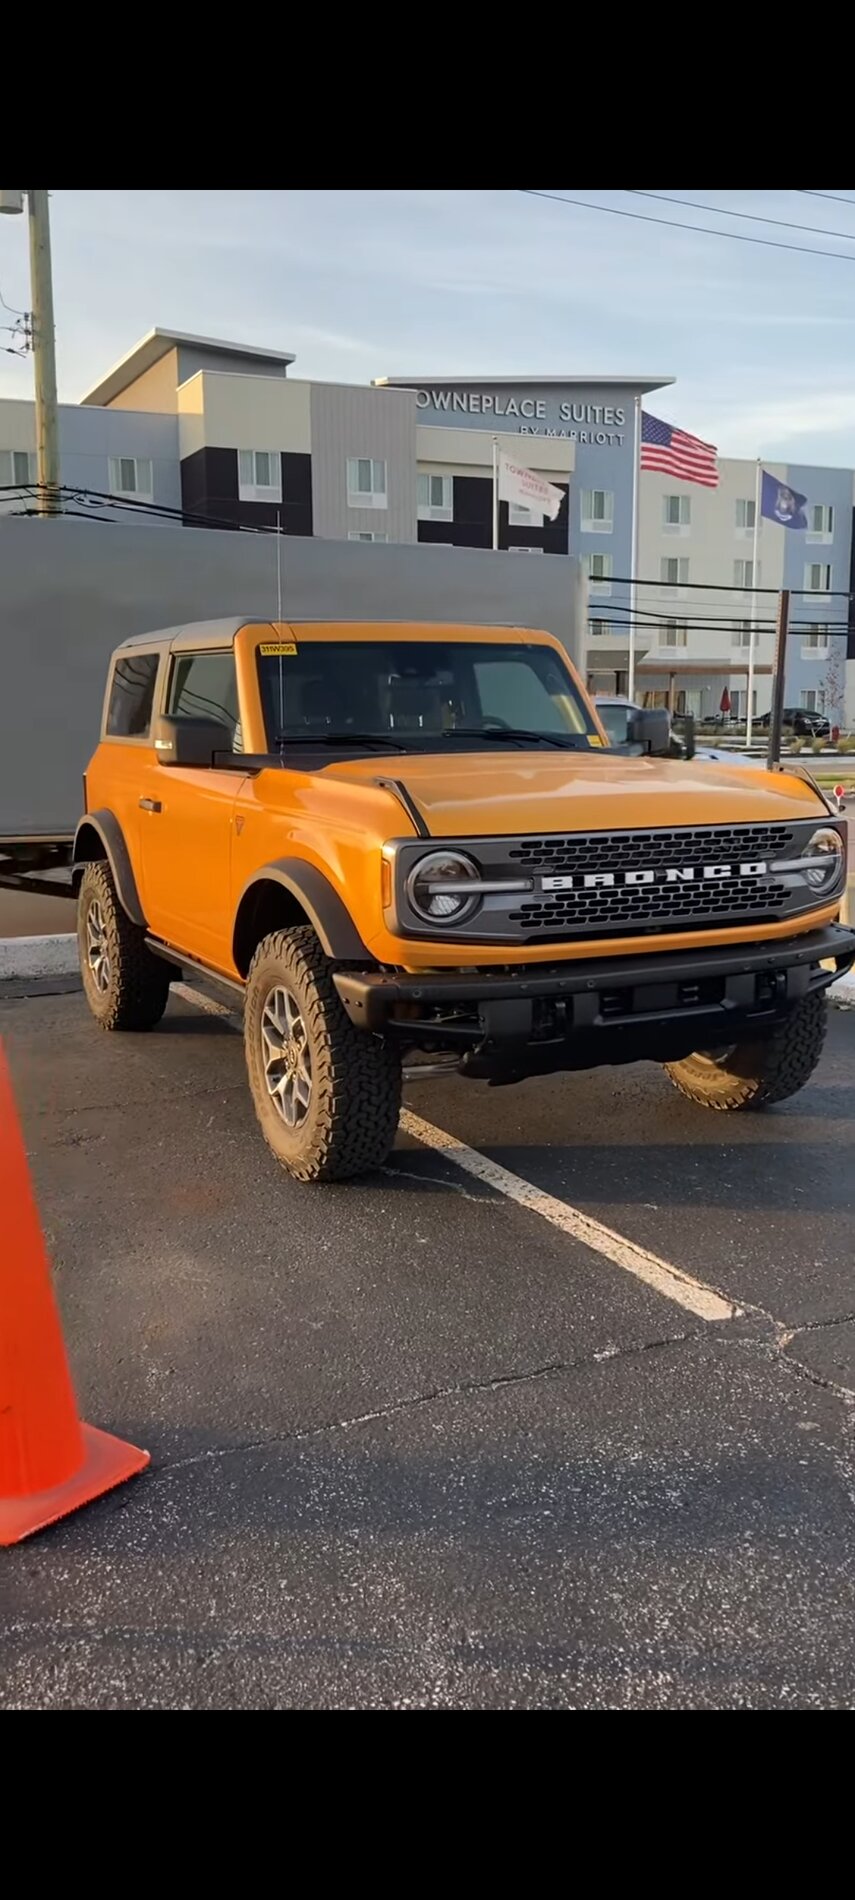 Ford Bronco In the wild: Cyber Orange 2dr Badlands w/ base wheels I've_Looked_At_This_For_Five_Hours_Now_Banner